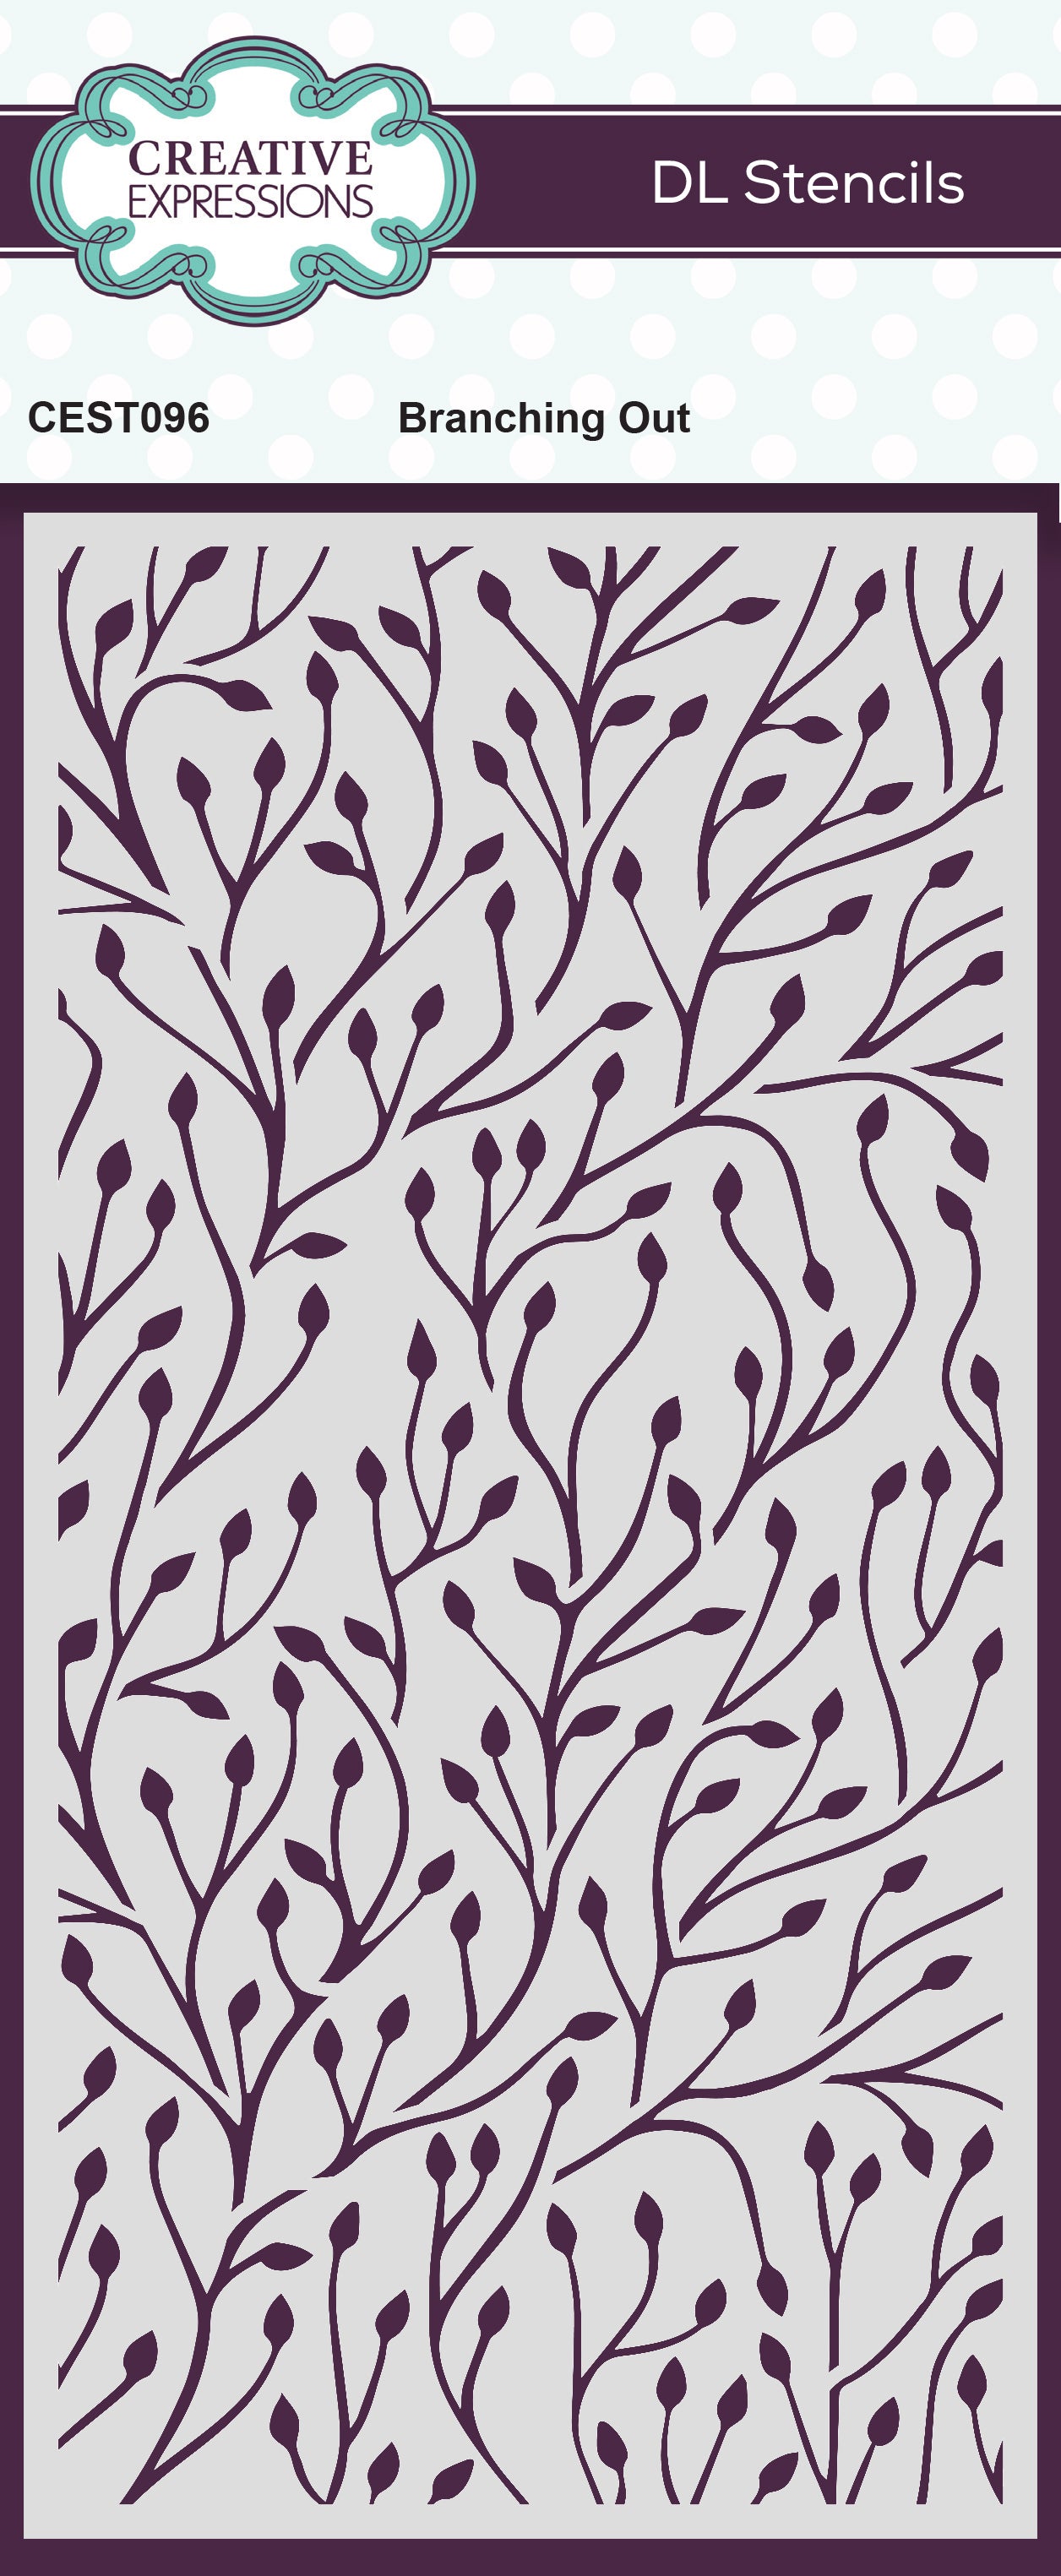 Creative Expressions Branching Out DL Stencil 4 in x 8 in (10.0 x 20.3 cm)